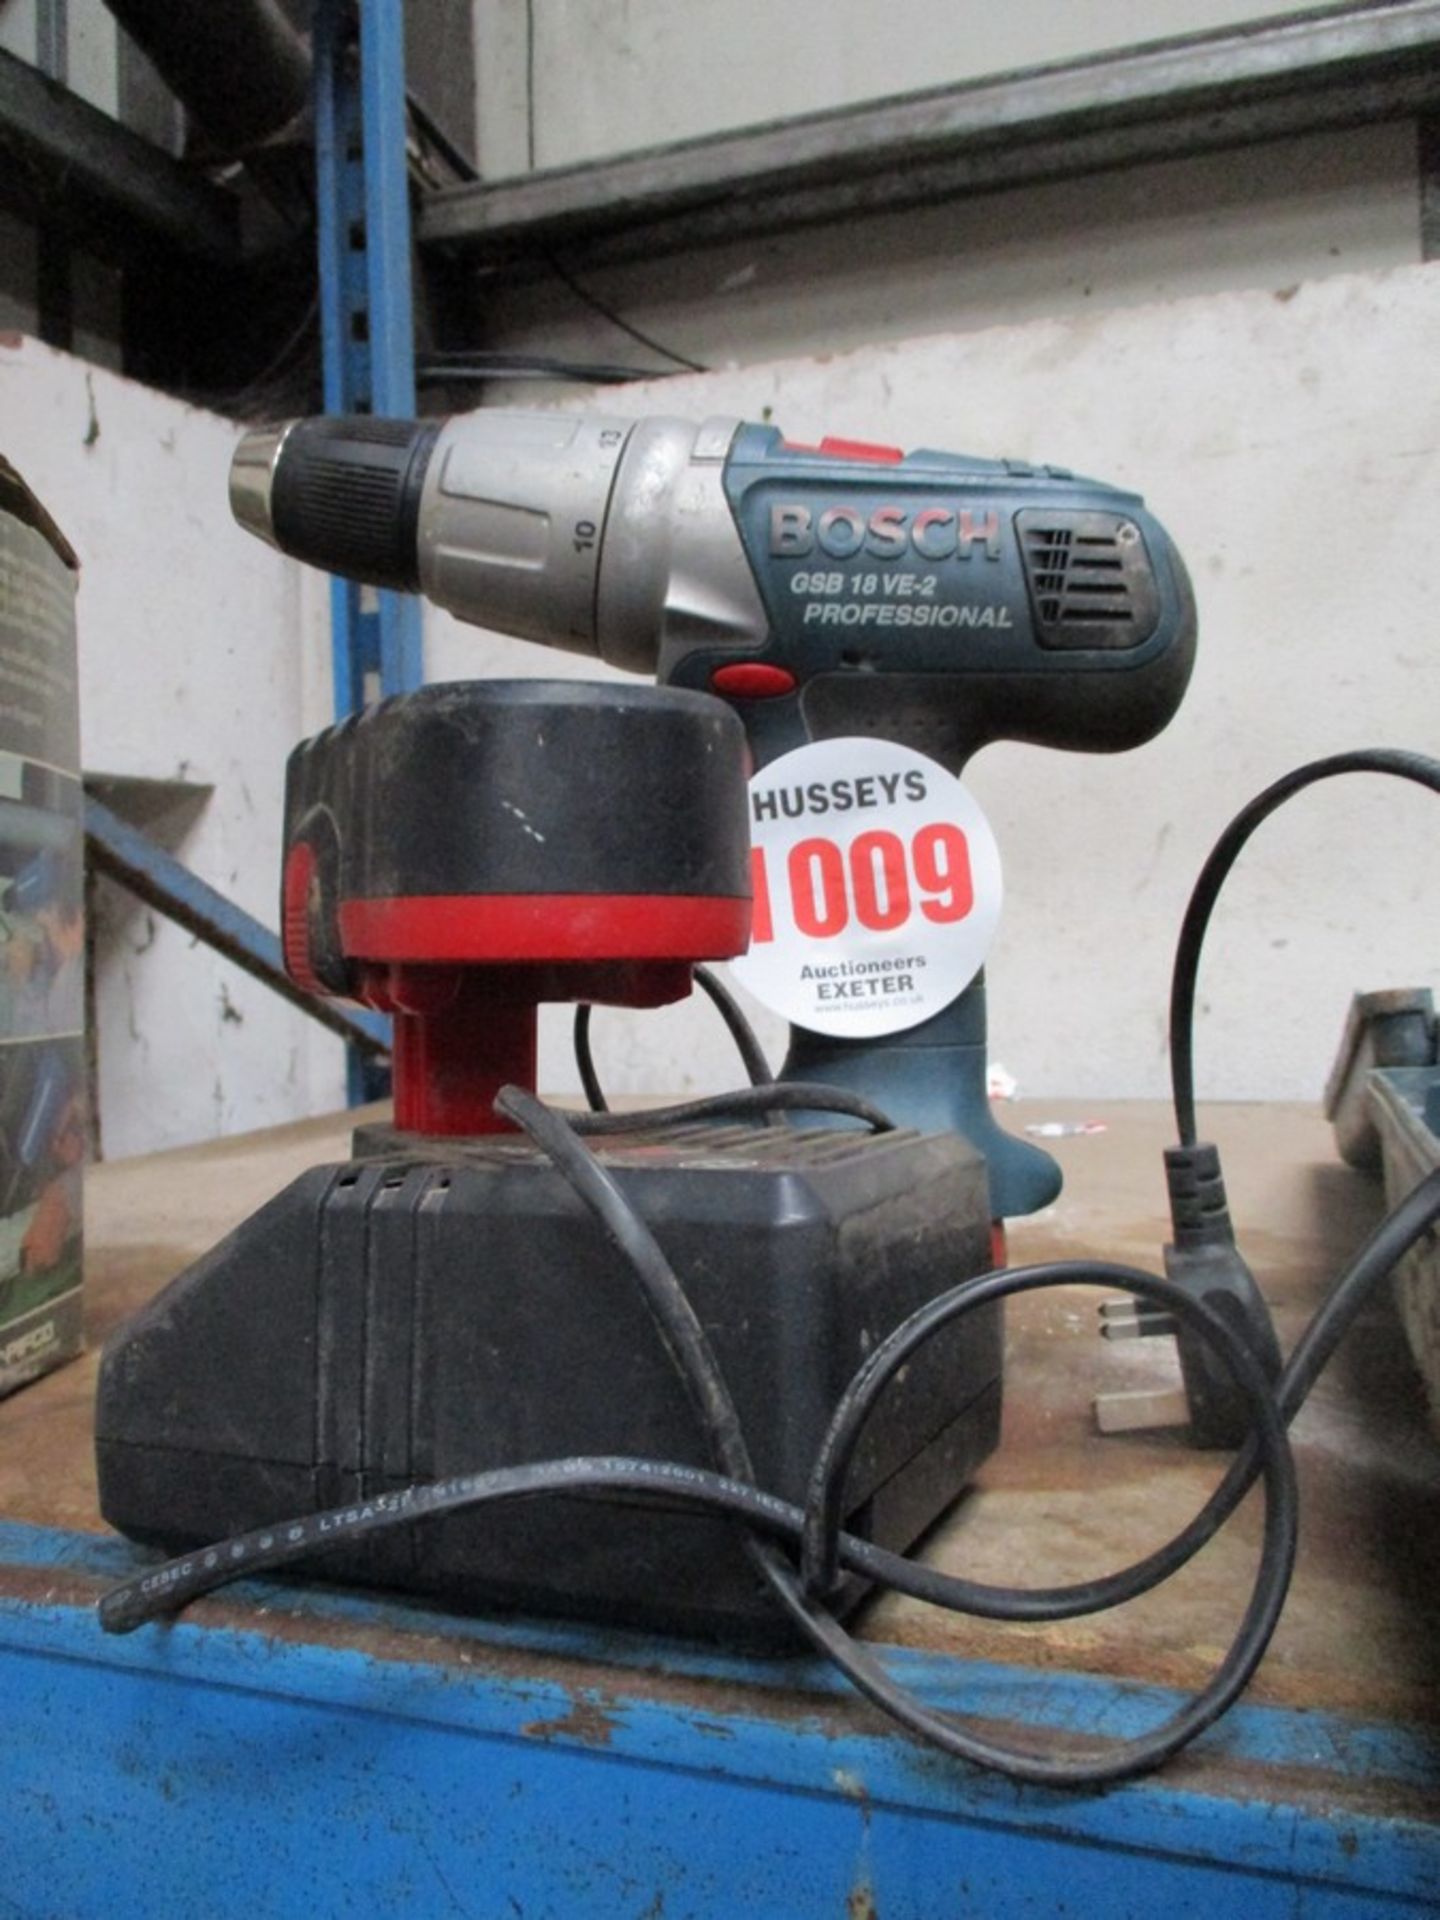 CORDLESS BOSCH DRILL C.W BATTERY & CHARGER